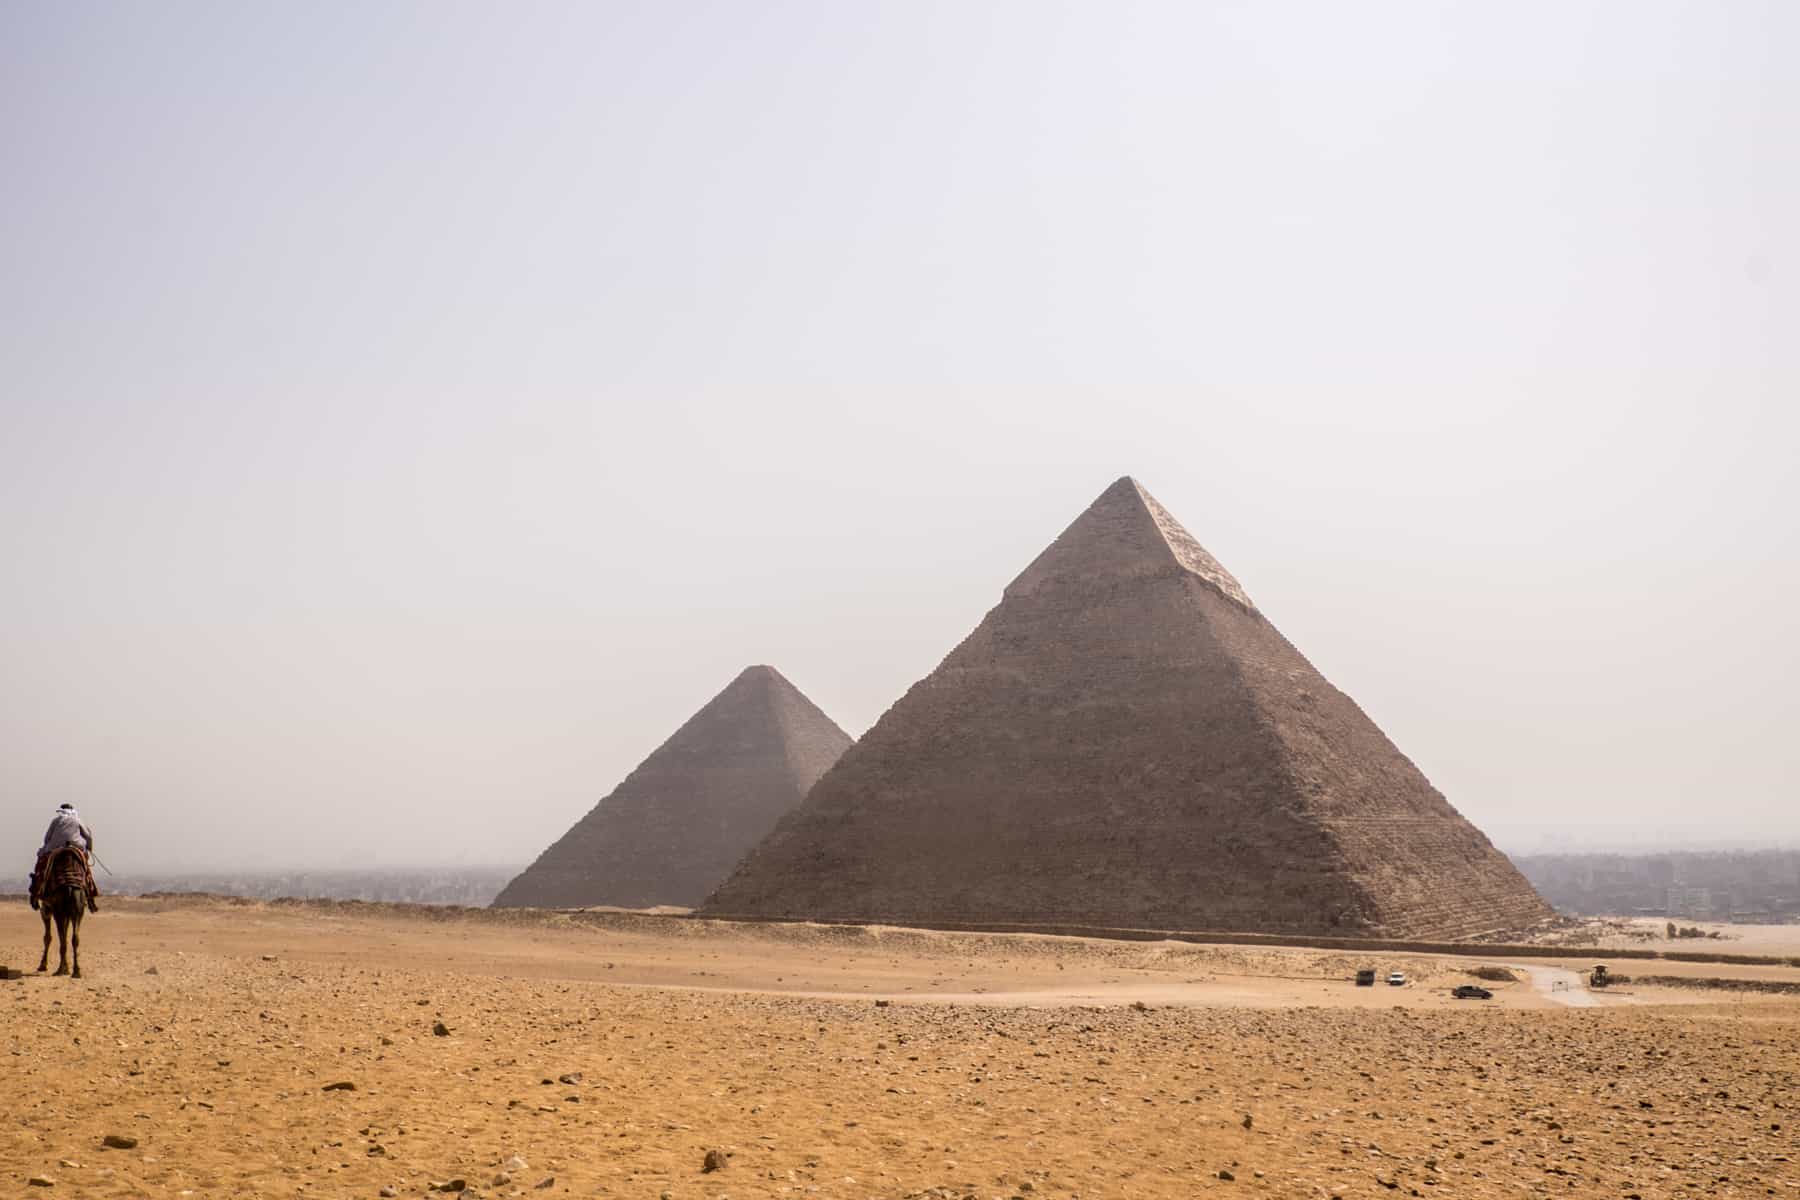 The great and middle pyramids of Egypt stand out in the desert of Giza, blocked out the city skyline in the distance